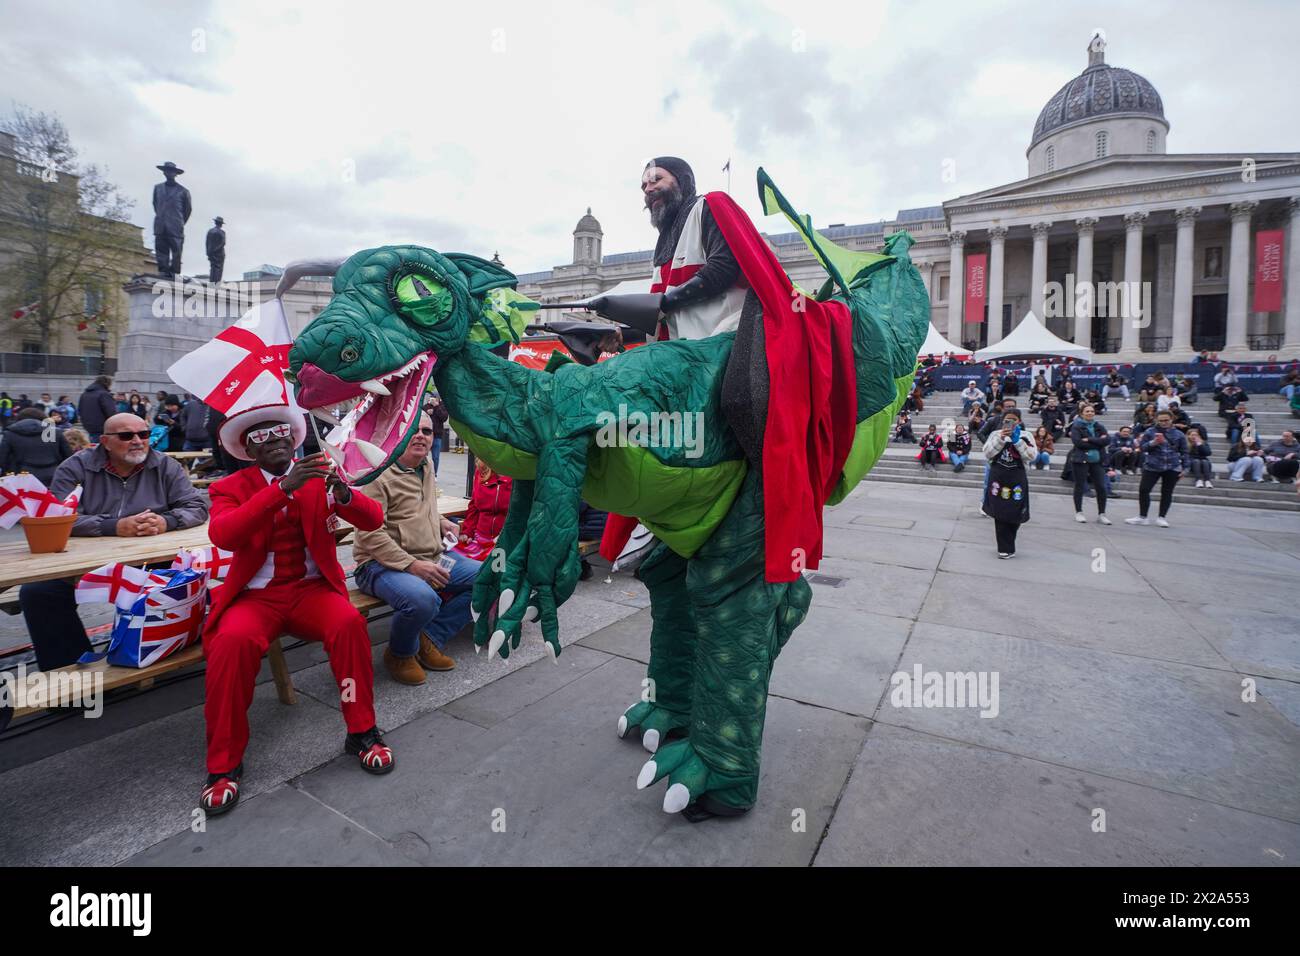 London 21 April 2024 .A man dressed as Saint George riding an inflatable dragon entertains the crowds  in  Trafalgar Square during the Saint George's celebrations. Credit: amer ghazzal/Alamy Live News Stock Photo